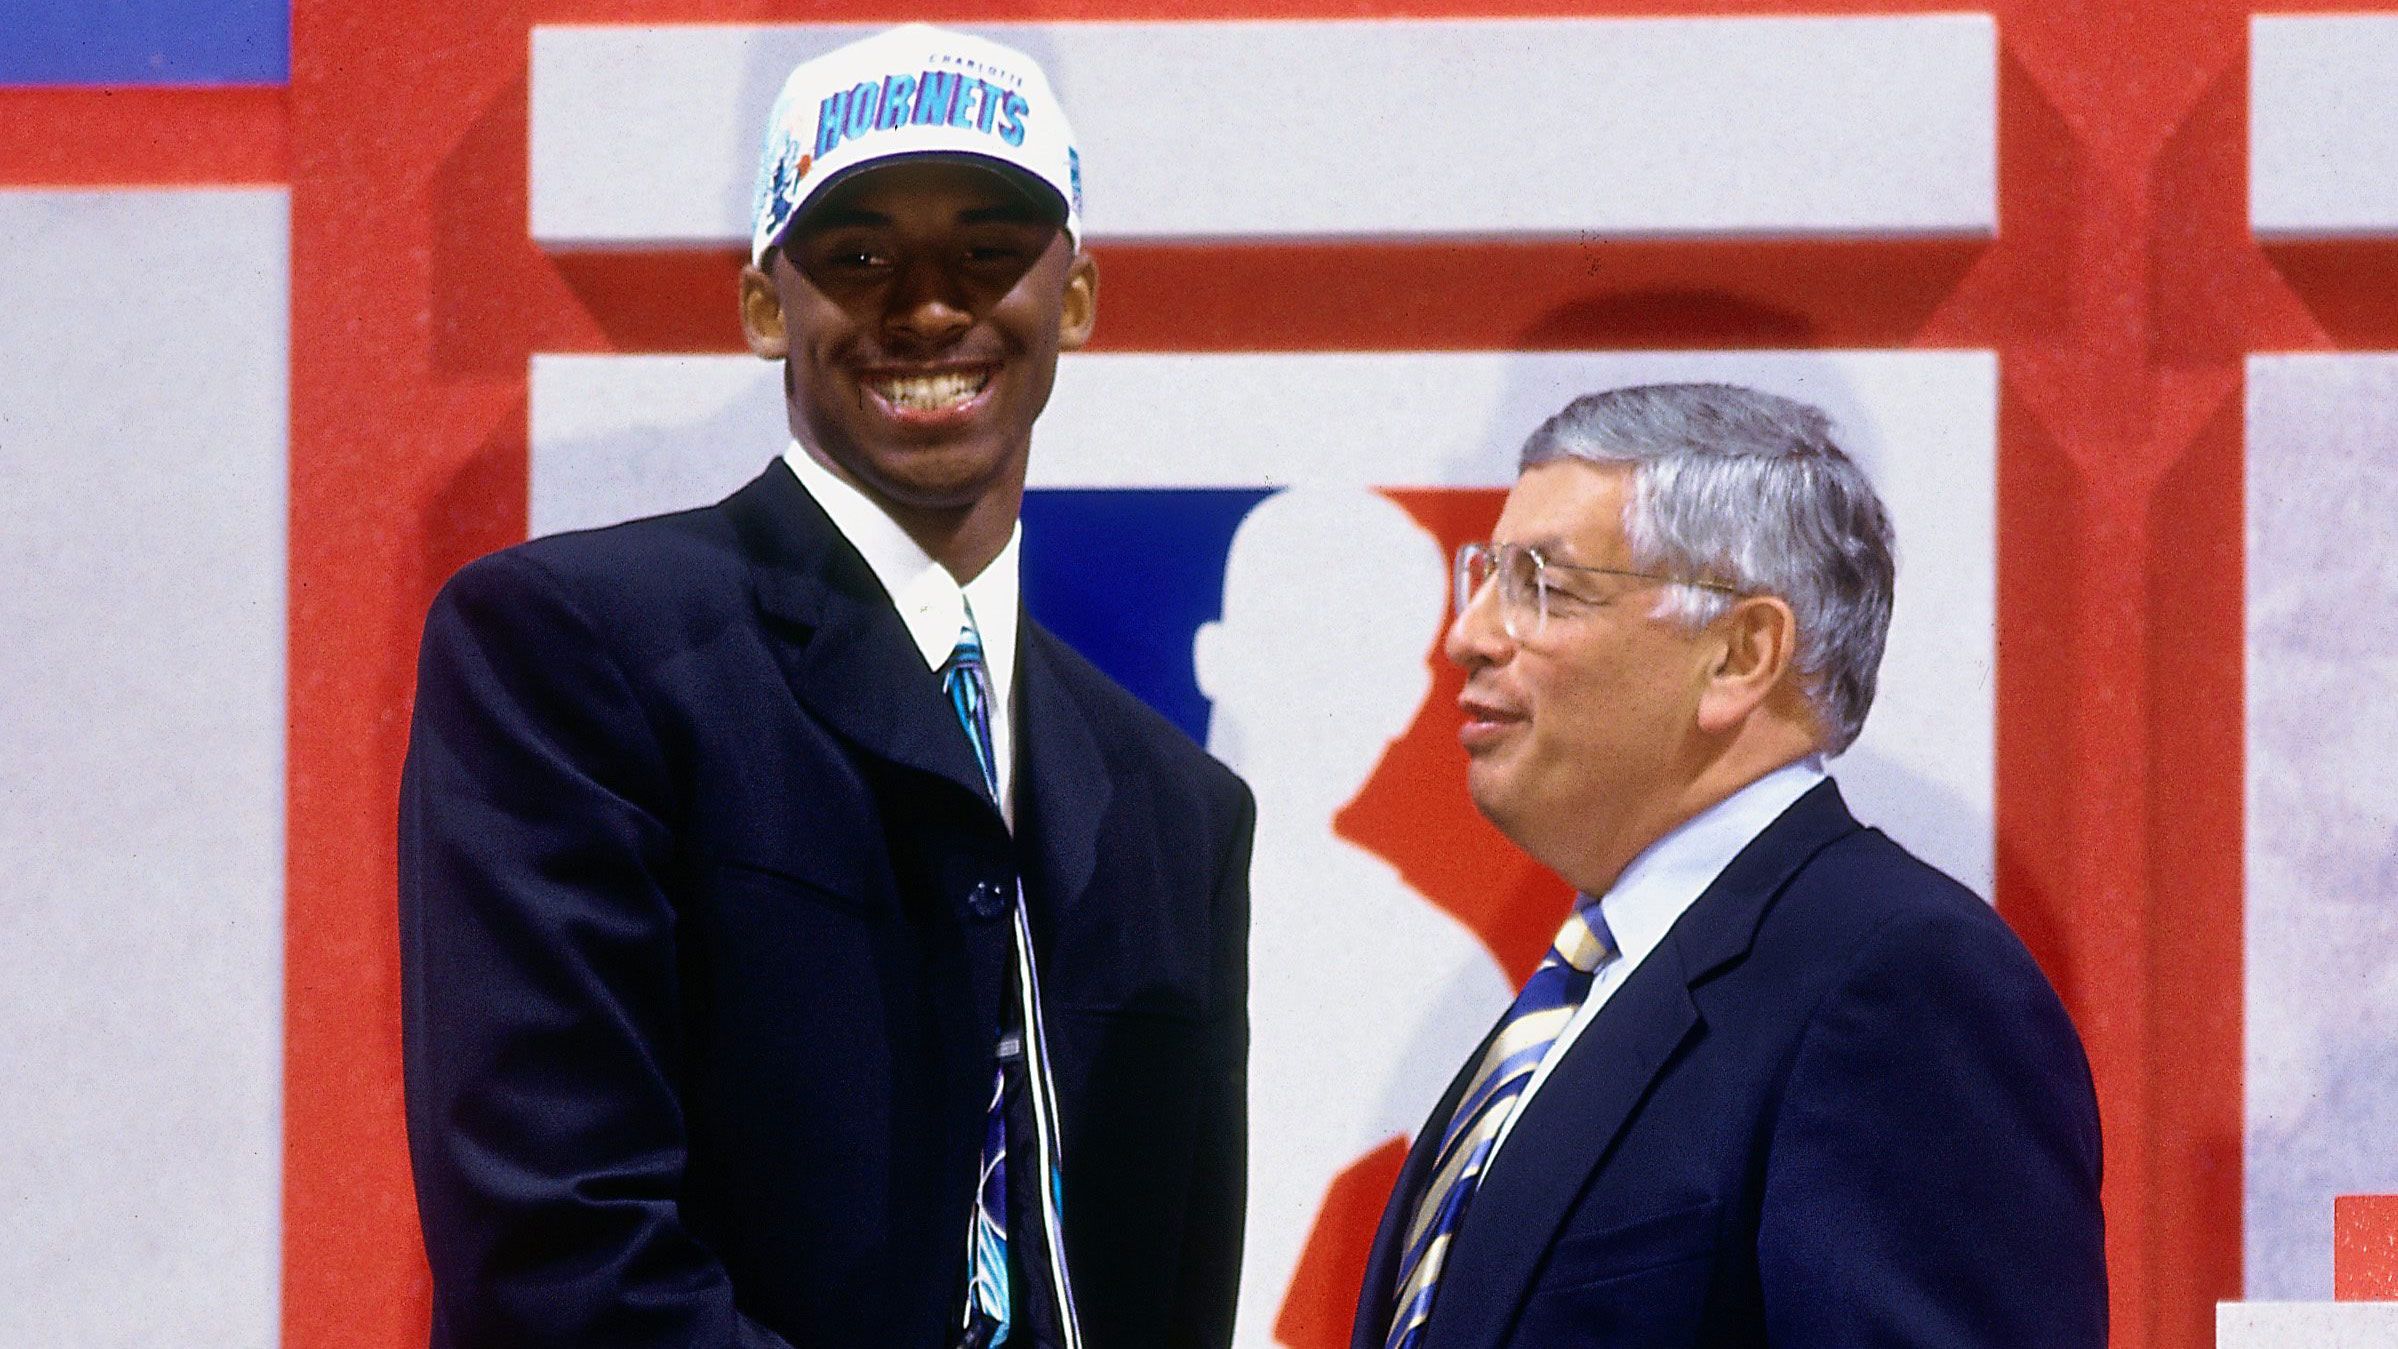 Kobe Bryant drafted by the Charlotte Hornets in 1996